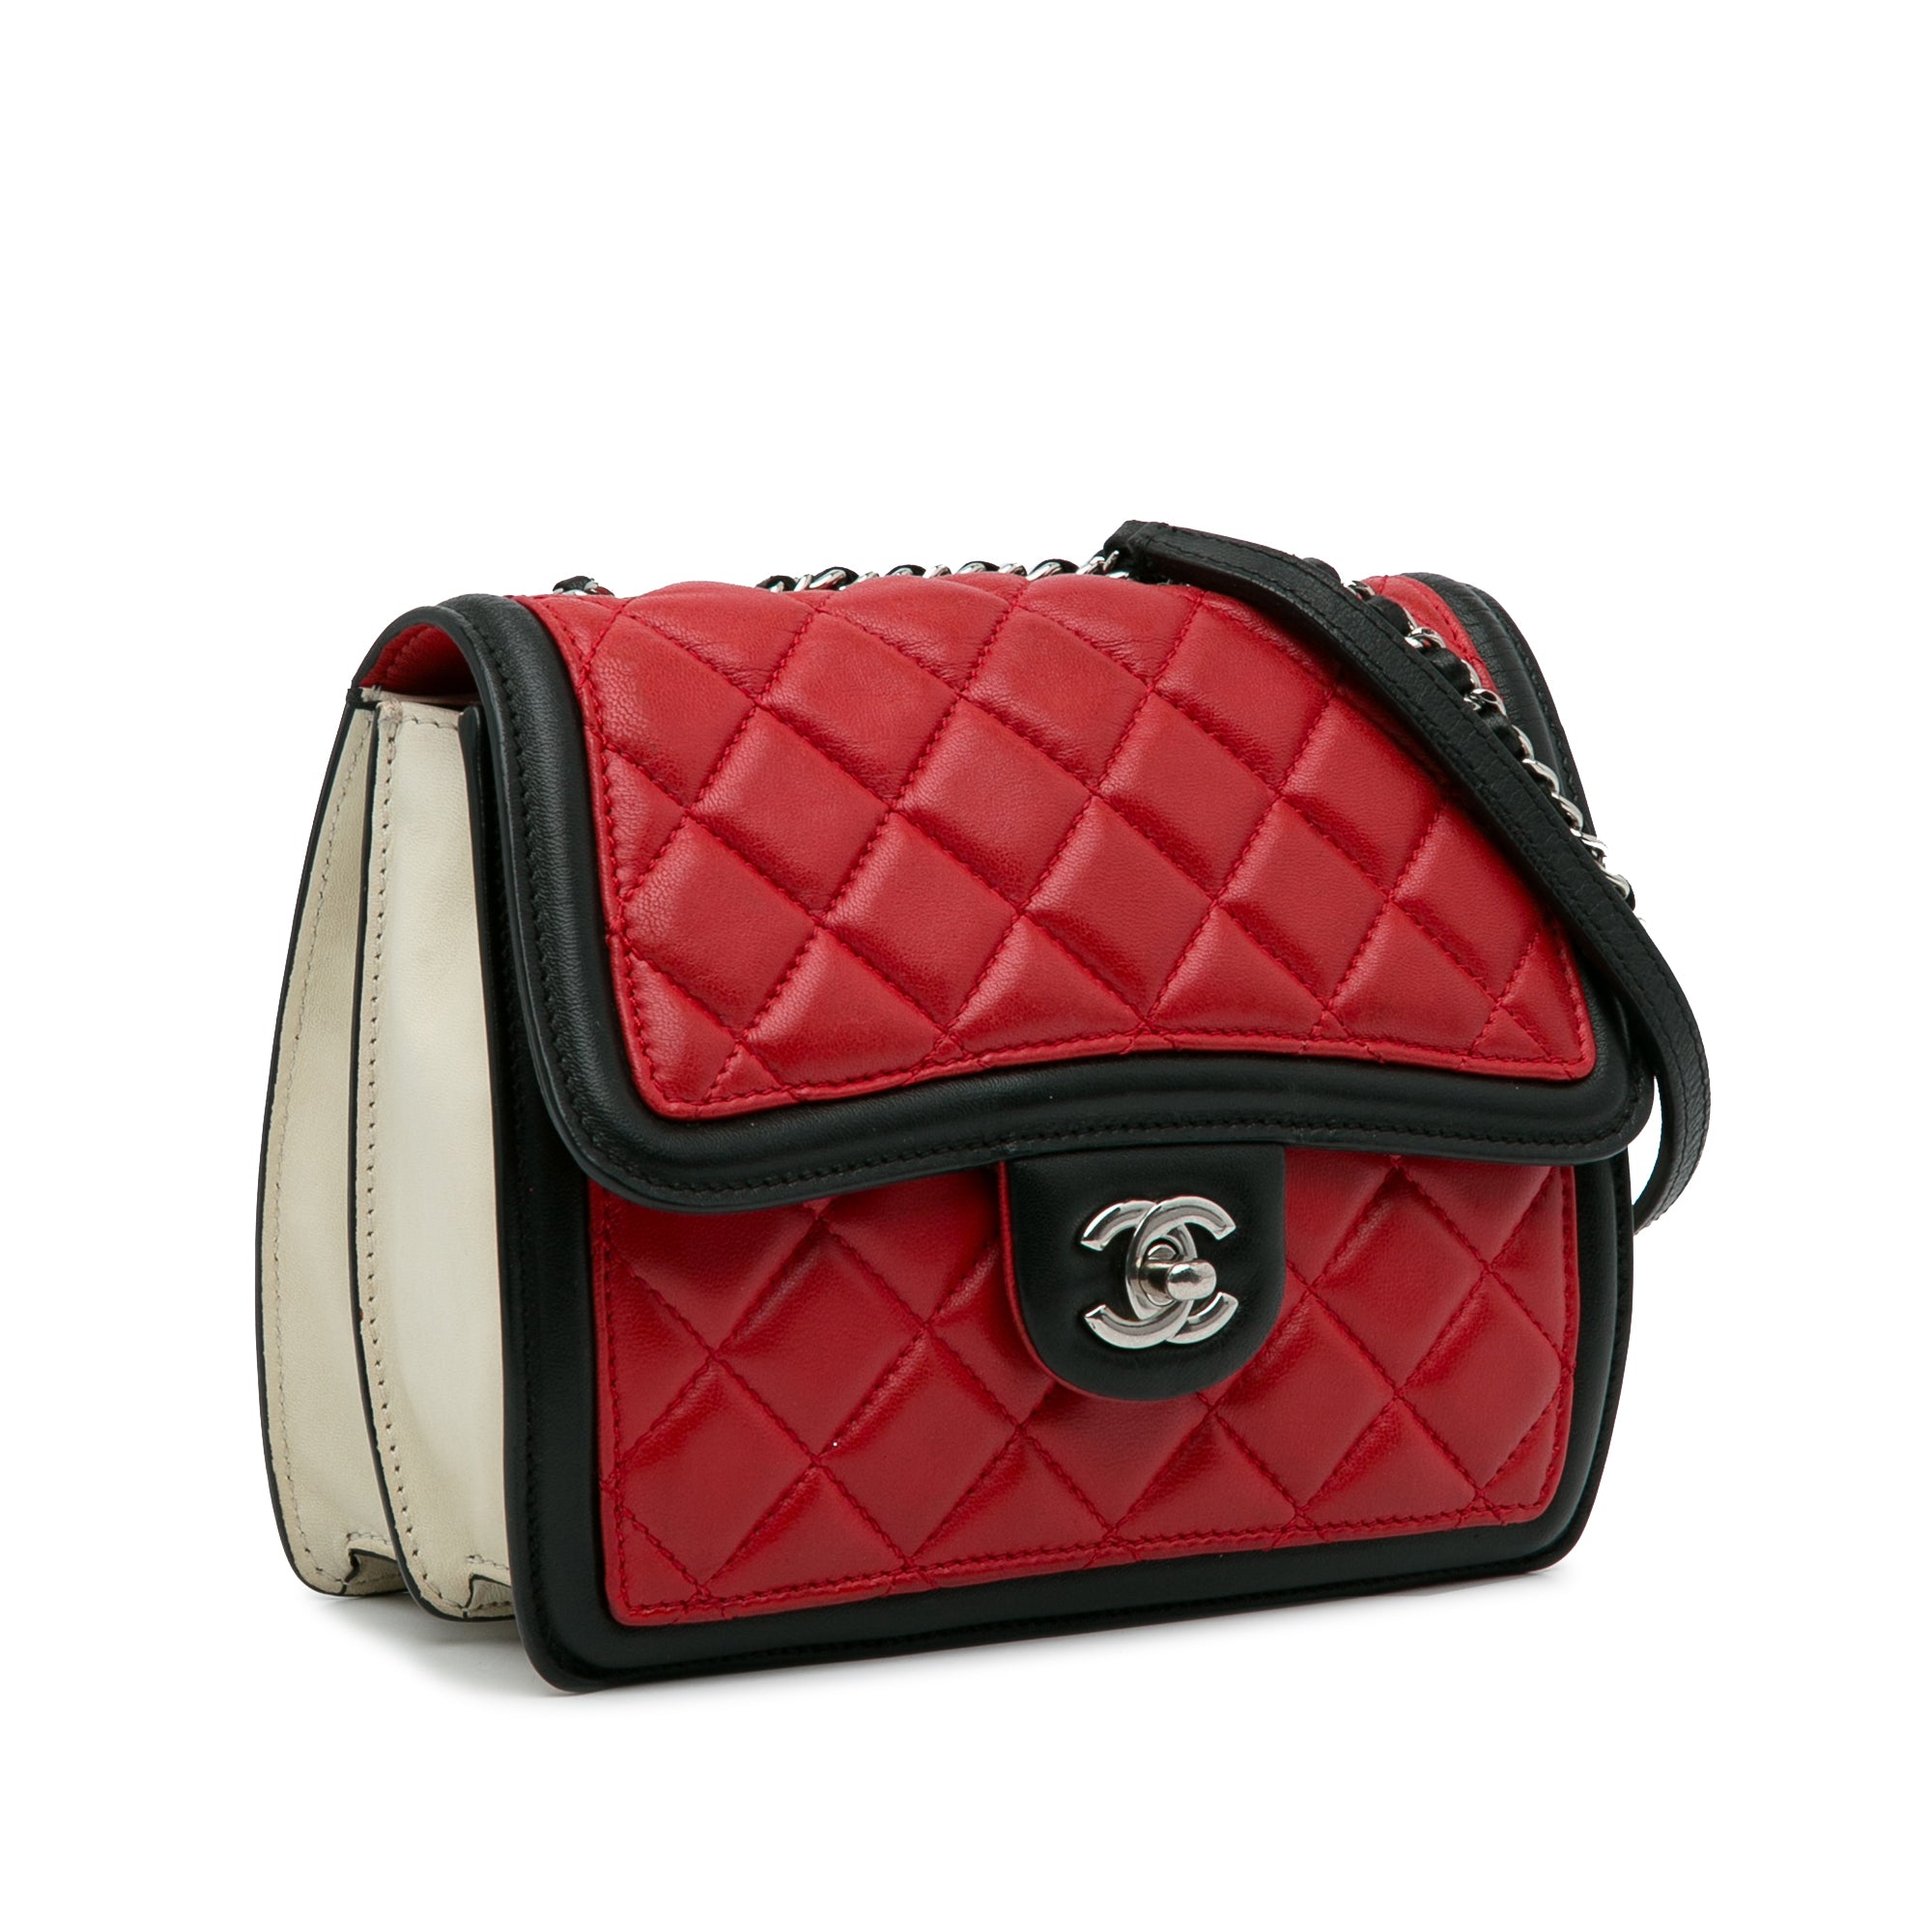 Foldover Flap Quilted Mini Crossbody Bag - AnnaKastle